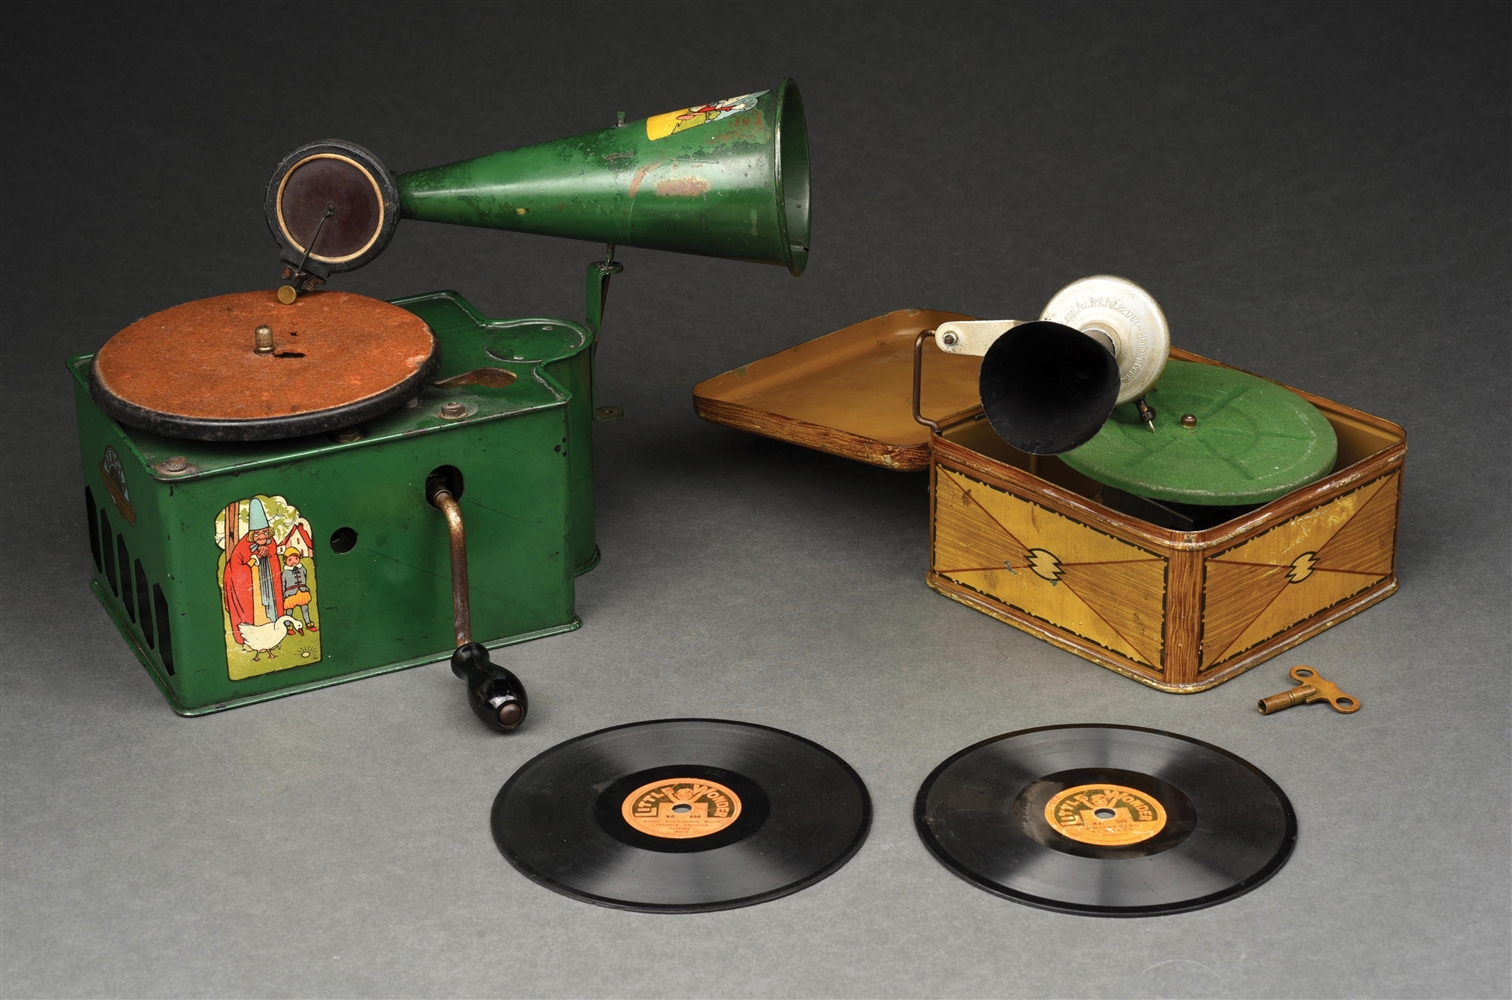 LOT OF 2: A PAIR OF CHILDS TOY PHONOGRAPHS, A GENOLA PHONOGRAPH AND A "BING PYGMYPHONE".